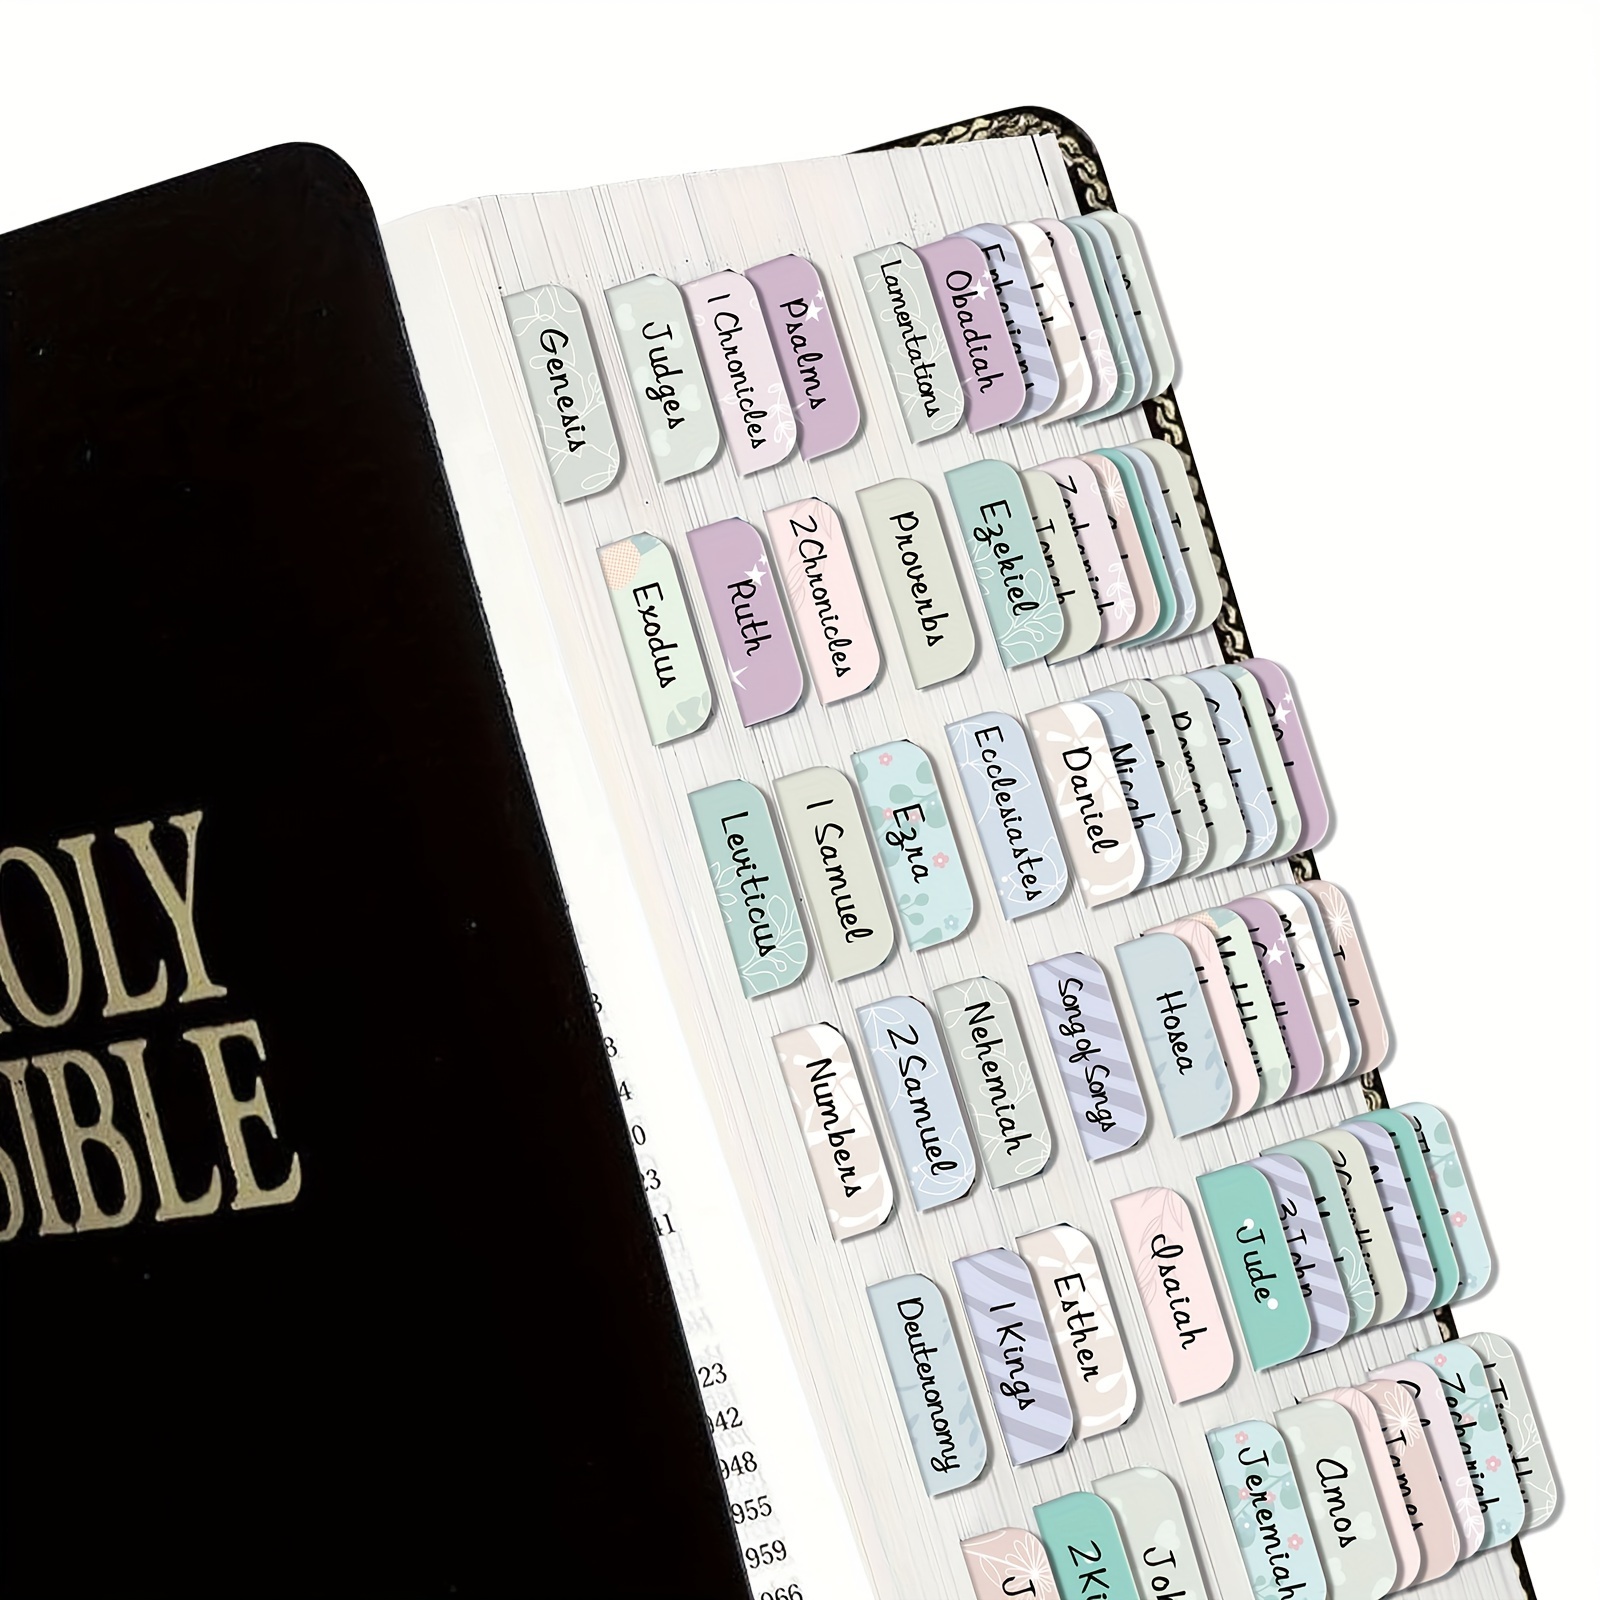 Tabs, Tabs Old And New Testament, Larger Laminated Tabs, Journaling  Supplies, Index Label Stickers For Women And Men,study , Index Tabs, Book  Tabs - Temu